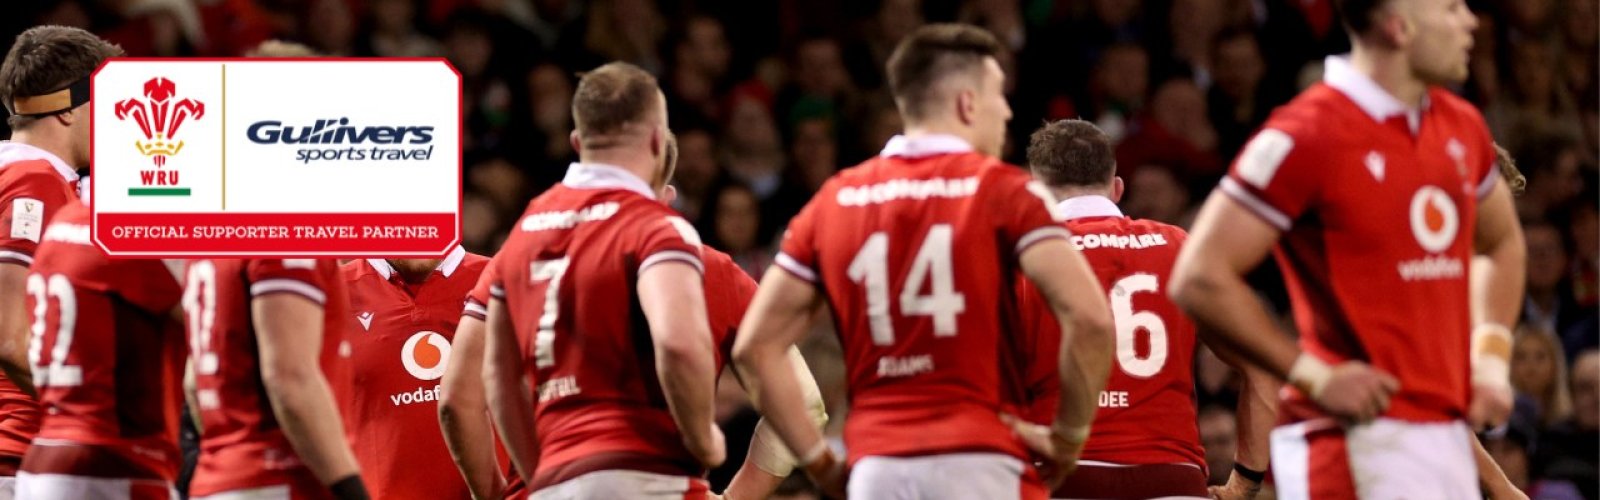 Follow Wales Guinness Six Nations 2025 match ticket packages image